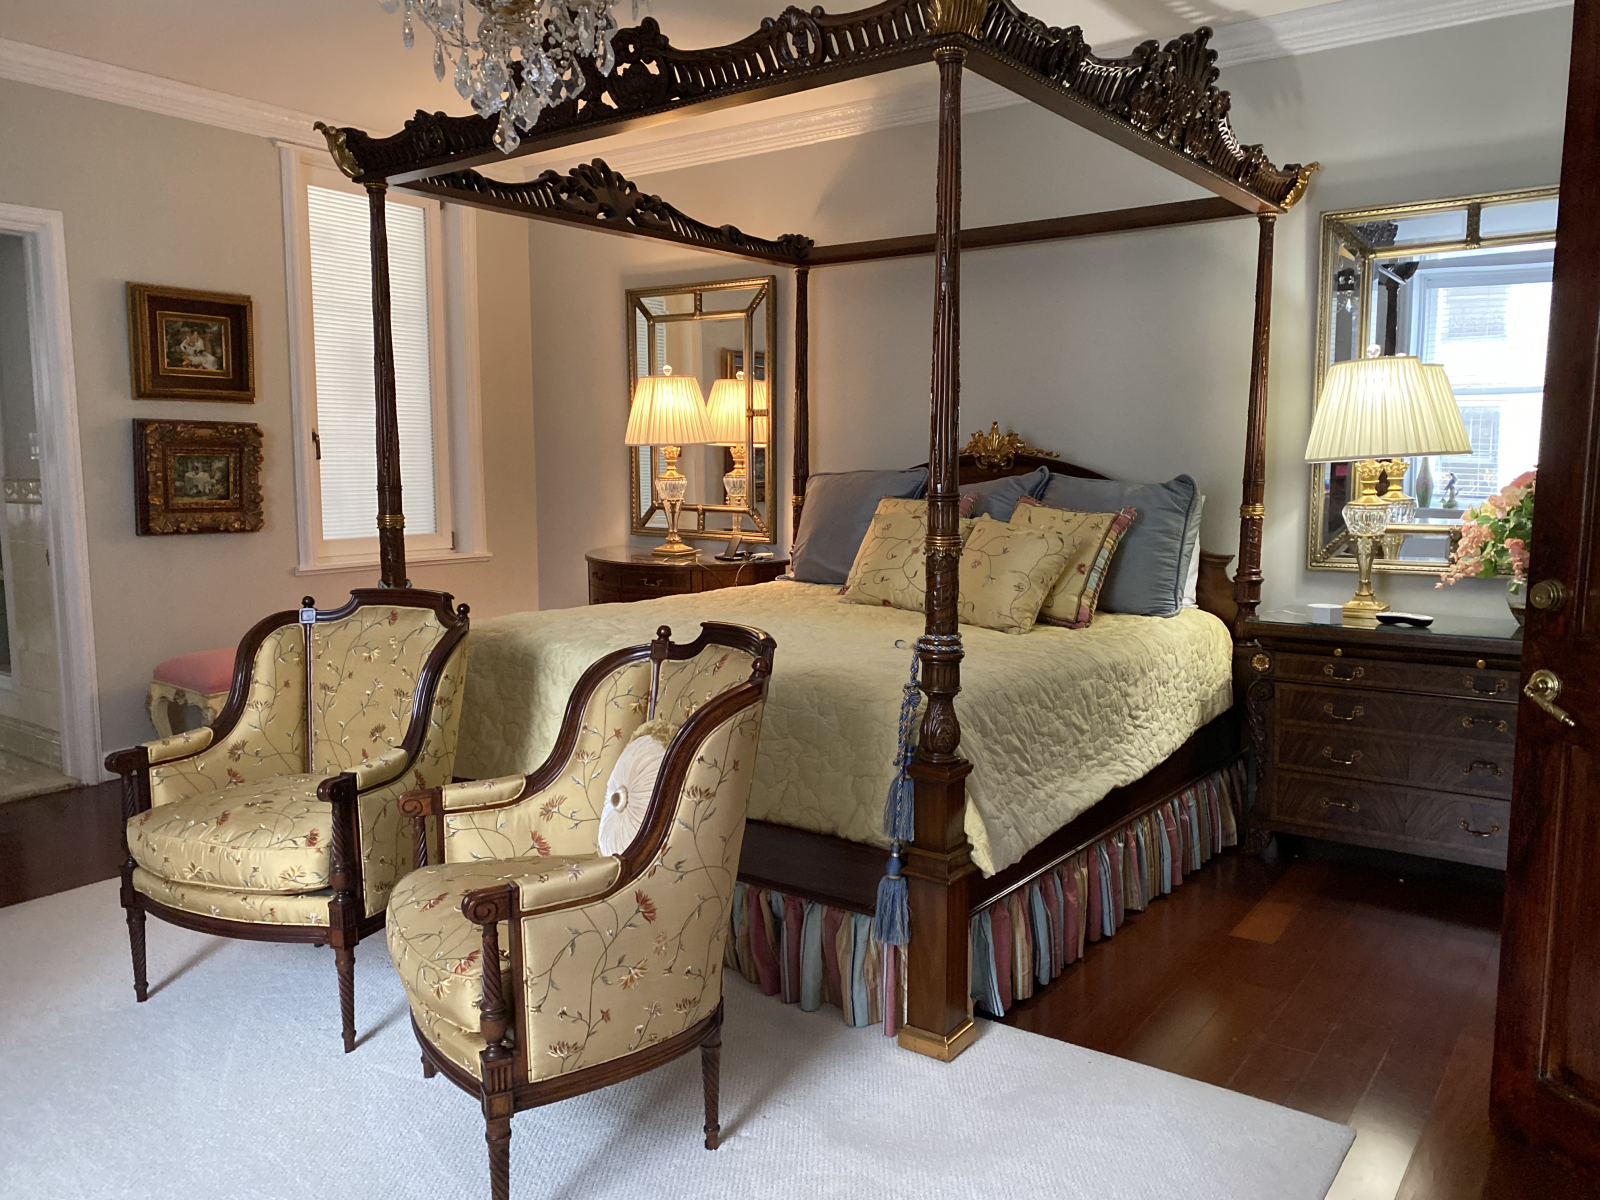 The amazing master bedroom with this exquisite carved and gilt decorated mahogany queen poster bed